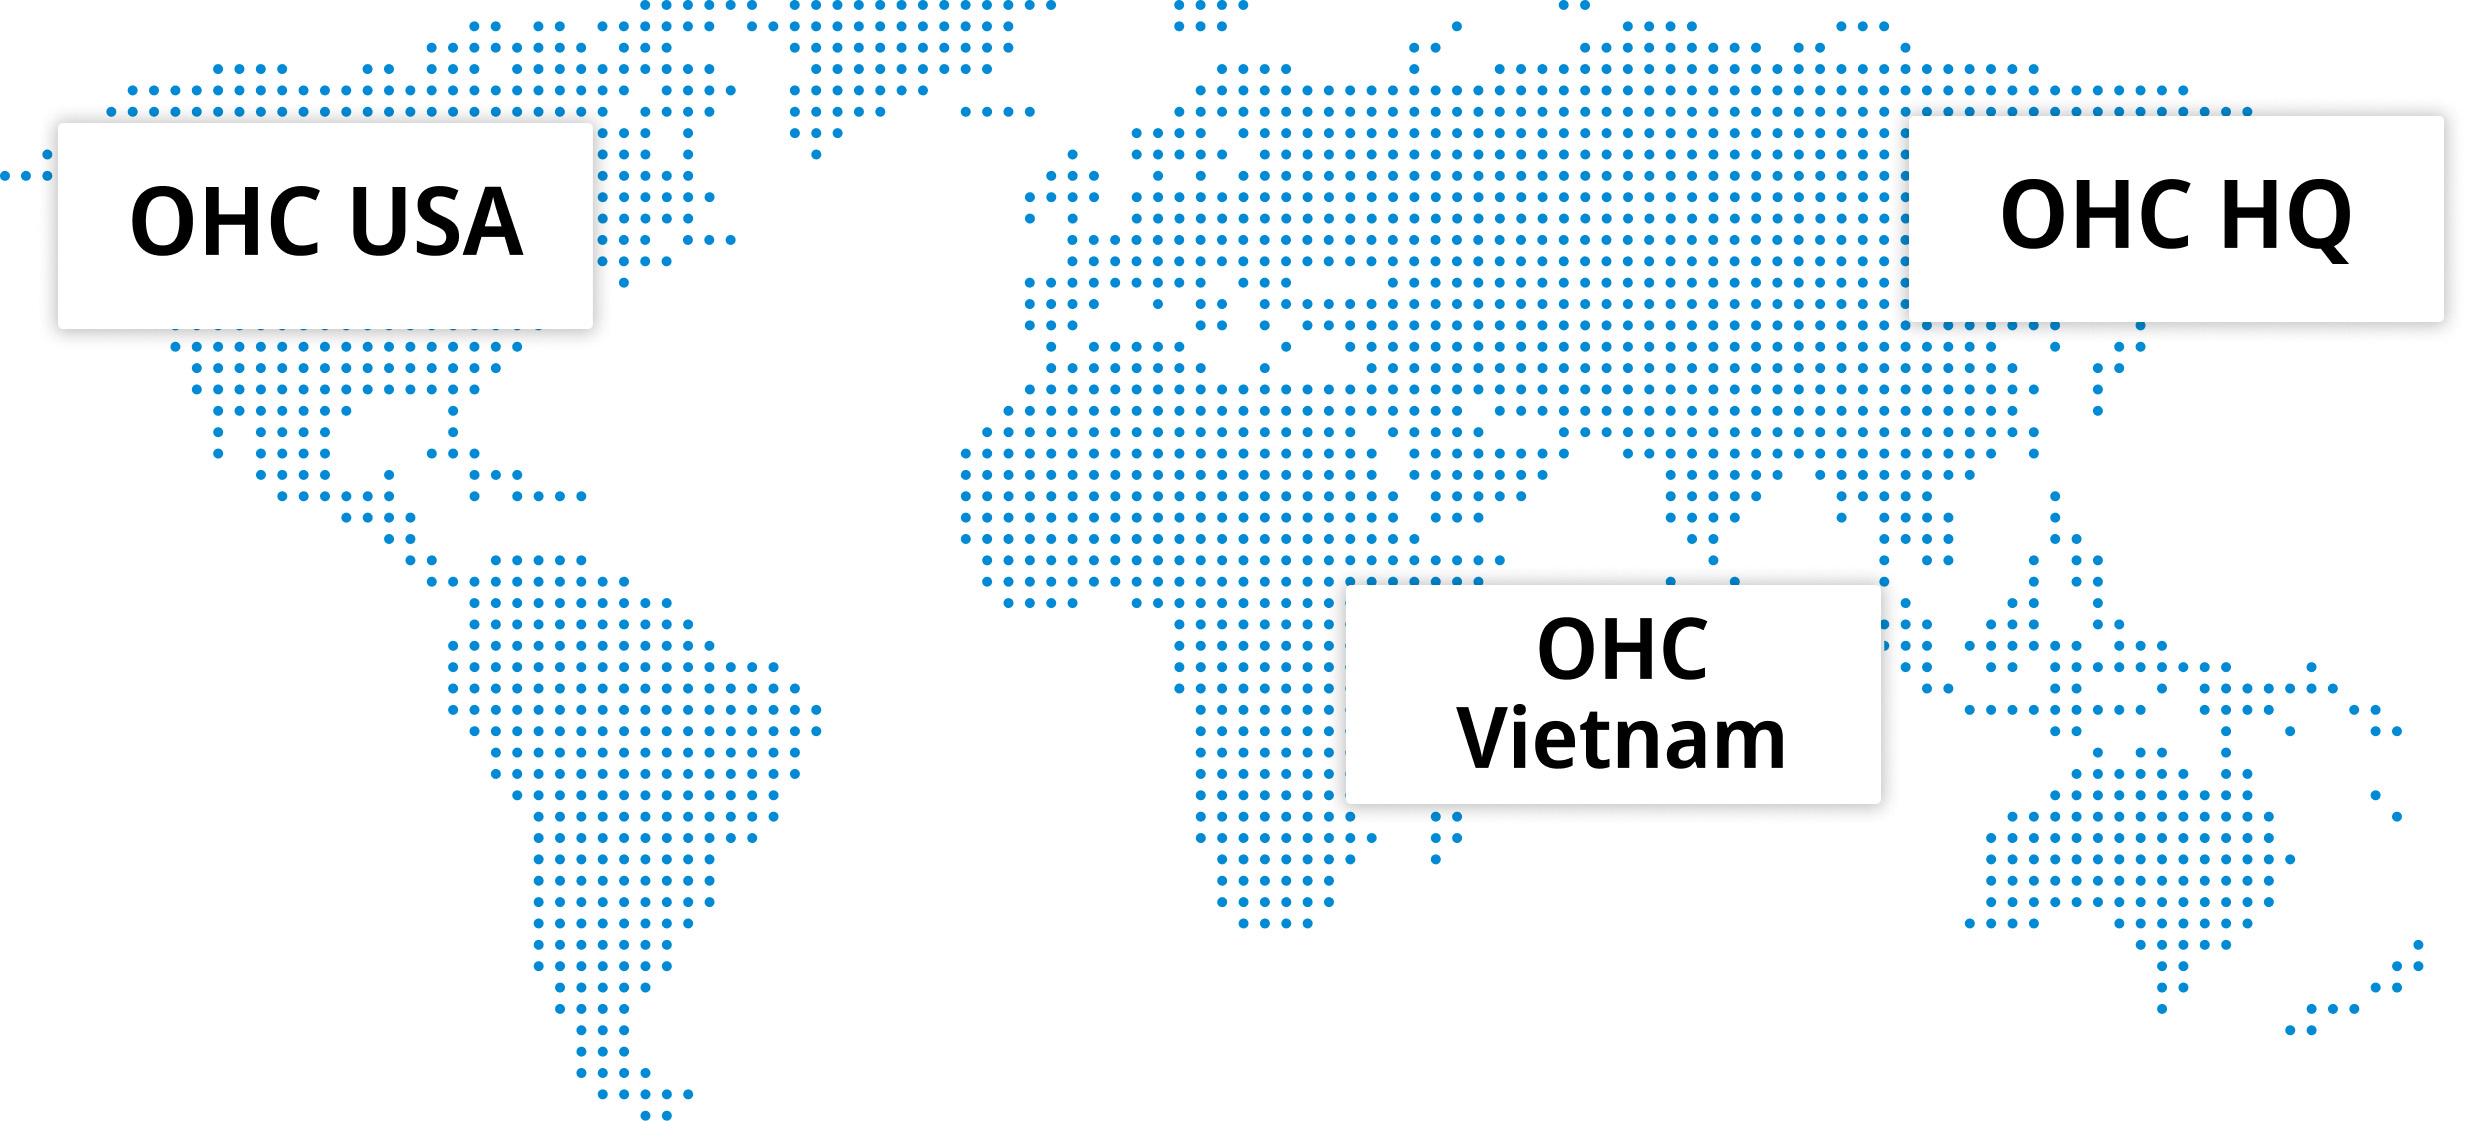 ohc global network image